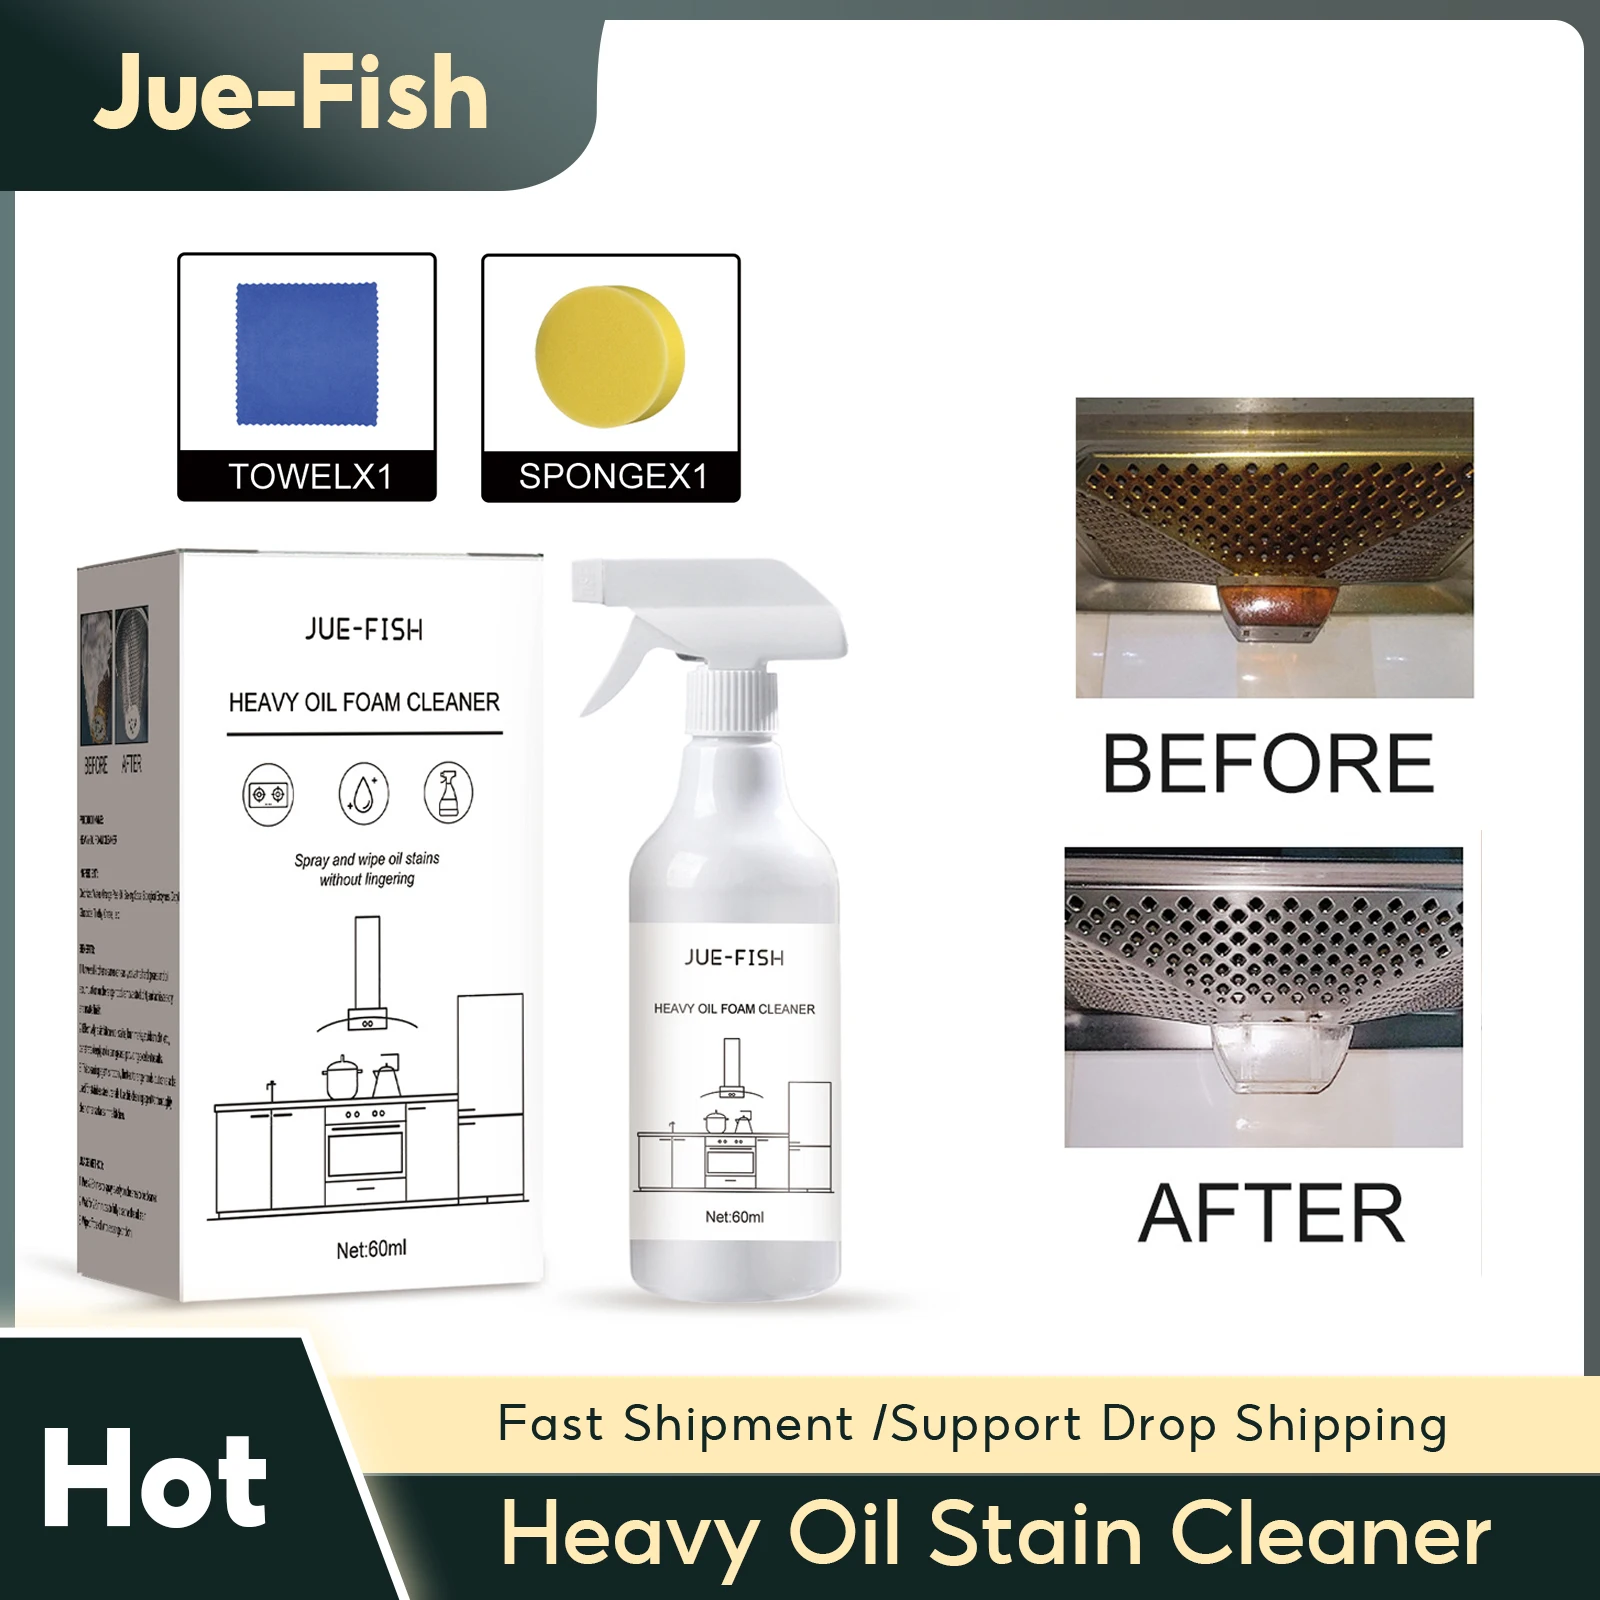 

Heavy Oil Stain Cleaner Powerful Foam Cleaner Range Hood Degreasing Cleaning Spray Multipurpose Kitchen Stove Cleaning Detergent